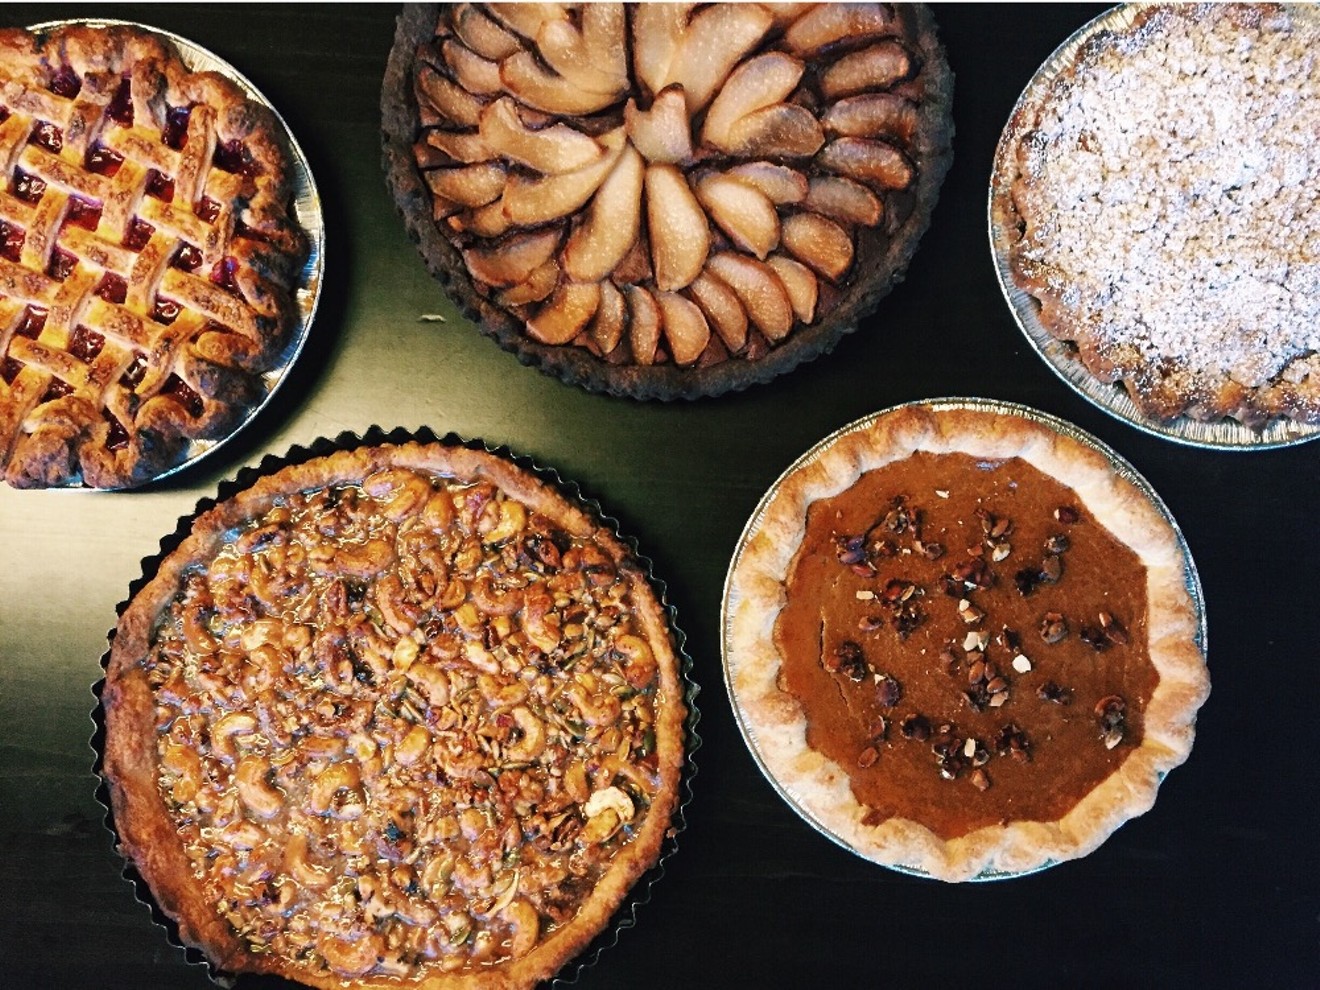 Spruce & Lark will feature pies and other pastries and breads from chef Alicia Luther Clardie when it opens later this year.